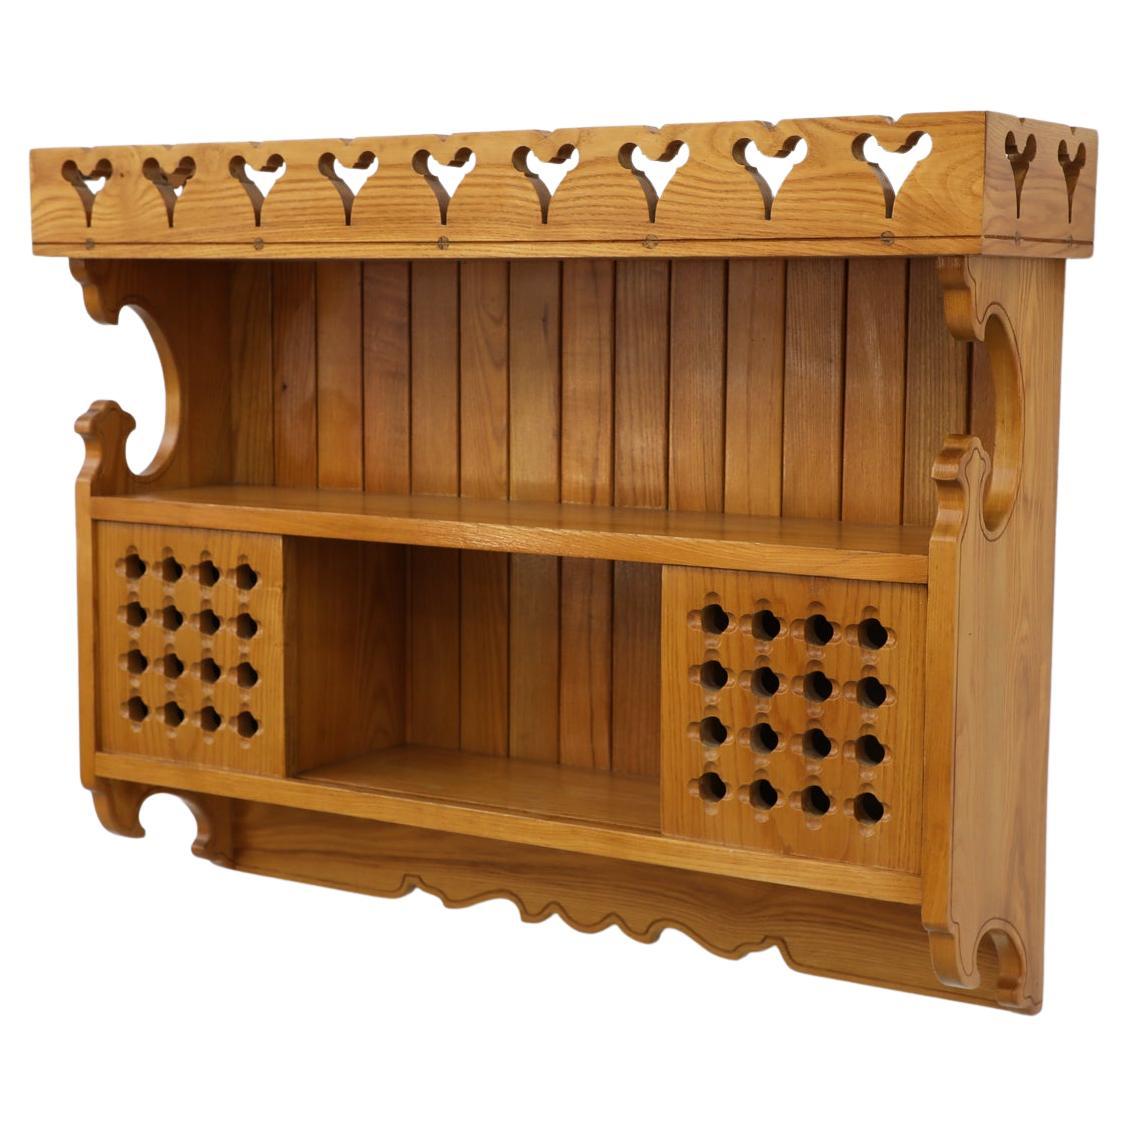 Tyrolean Style Ornate Wall Cabinet from Austria